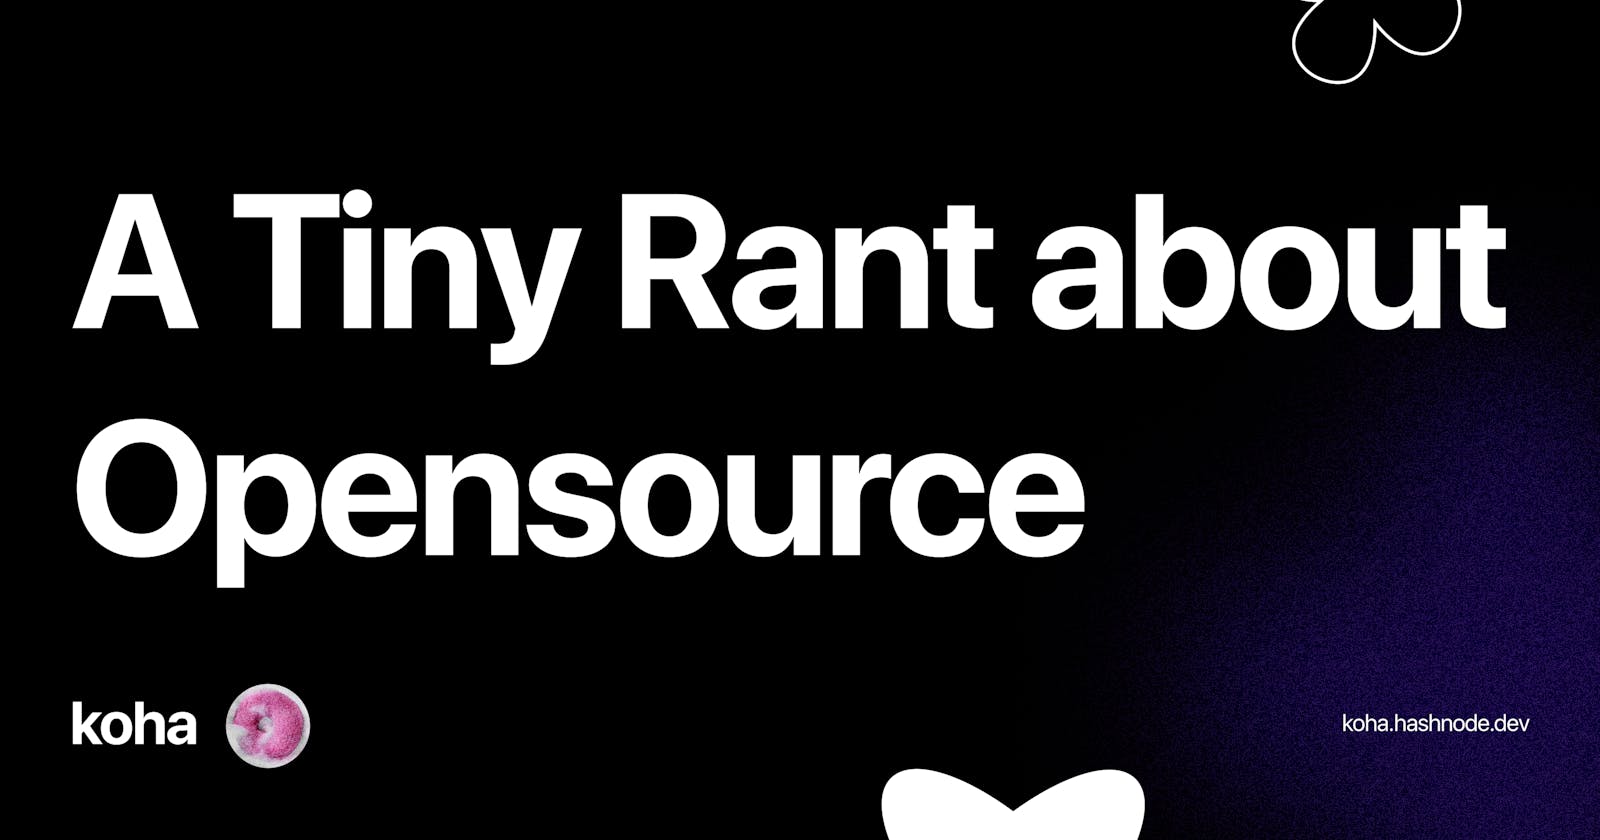 A Tiny Rant about Opensource